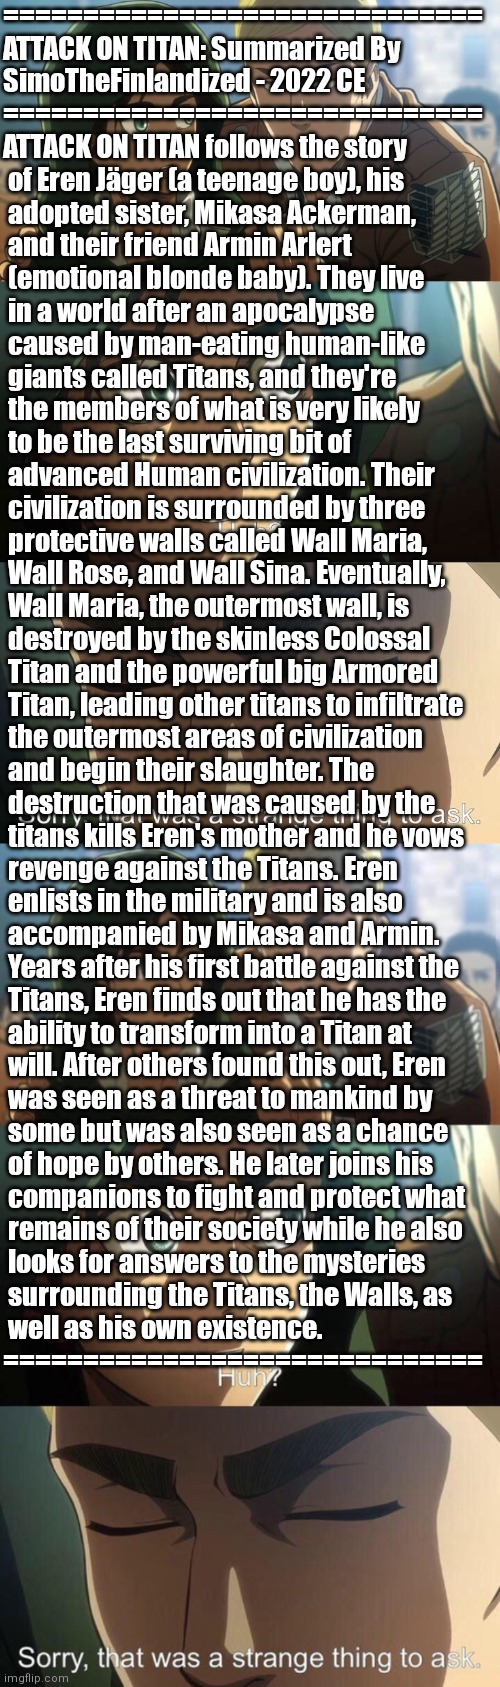 ATTACK ON TITAN: Summarized By SimoTheFinlandized - 2022 CE | ==============================
ATTACK ON TITAN: Summarized By 
SimoTheFinlandized - 2022 CE
==============================
ATTACK ON TITAN follows the story
 of Eren Jäger (a teenage boy), his
 adopted sister, Mikasa Ackerman,
 and their friend Armin Arlert
 (emotional blonde baby). They live 
 in a world after an apocalypse
 caused by man-eating human-like
 giants called Titans, and they're
 the members of what is very likely 
 to be the last surviving bit of
 advanced Human civilization. Their
 civilization is surrounded by three
 protective walls called Wall Maria,
 Wall Rose, and Wall Sina. Eventually,
 Wall Maria, the outermost wall, is
 destroyed by the skinless Colossal
 Titan and the powerful big Armored
 Titan, leading other titans to infiltrate
 the outermost areas of civilization
 and begin their slaughter. The
 destruction that was caused by the
 titans kills Eren's mother and he vows
 revenge against the Titans. Eren
 enlists in the military and is also
 accompanied by Mikasa and Armin.
 Years after his first battle against the
 Titans, Eren finds out that he has the
 ability to transform into a Titan at
 will. After others found this out, Eren
 was seen as a threat to mankind by
 some but was also seen as a chance
 of hope by others. He later joins his
 companions to fight and protect what
 remains of their society while he also
 looks for answers to the mysteries
 surrounding the Titans, the Walls, as
 well as his own existence.
============================== | image tagged in simothefinlandized,attack on titan,anime,manga,summarized | made w/ Imgflip meme maker